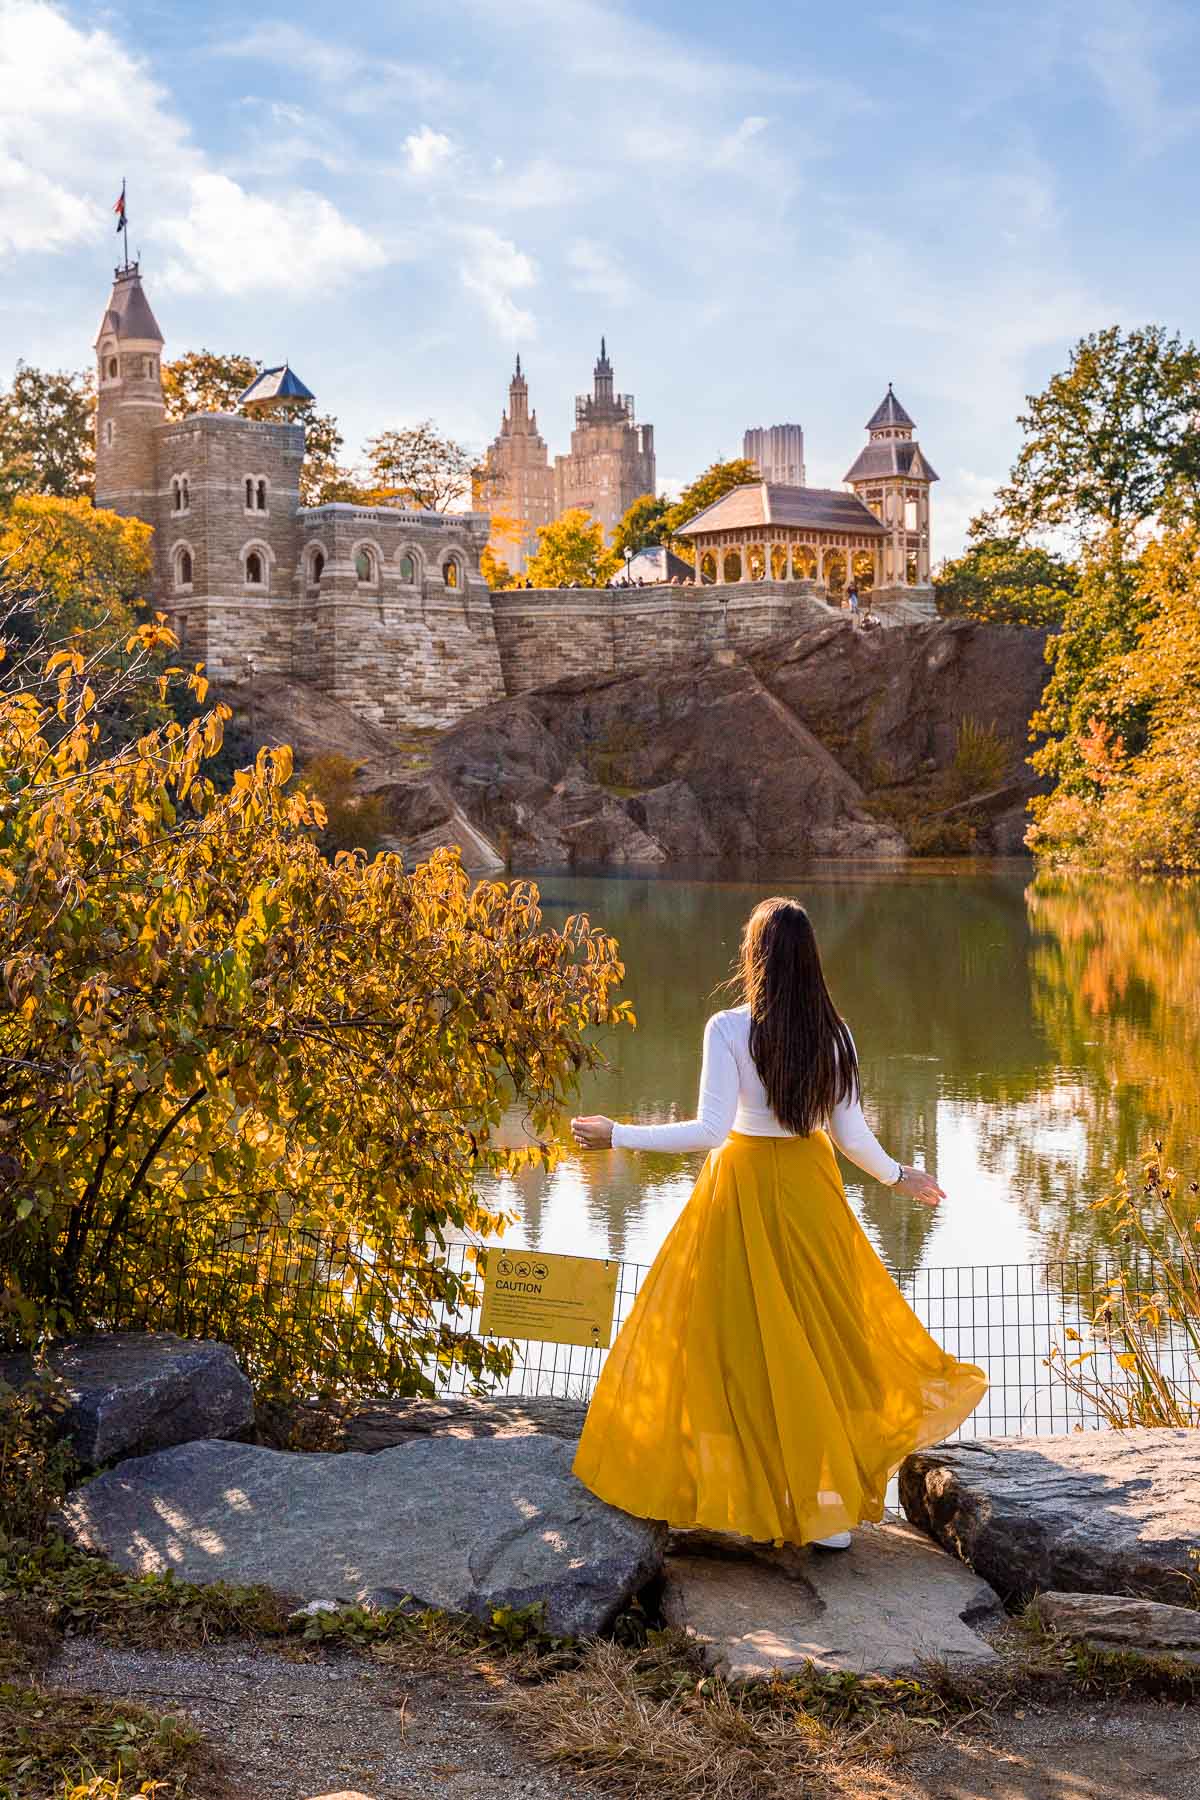 Girl in yellow dress in front of the Belvedere Castle in Central Park, New York